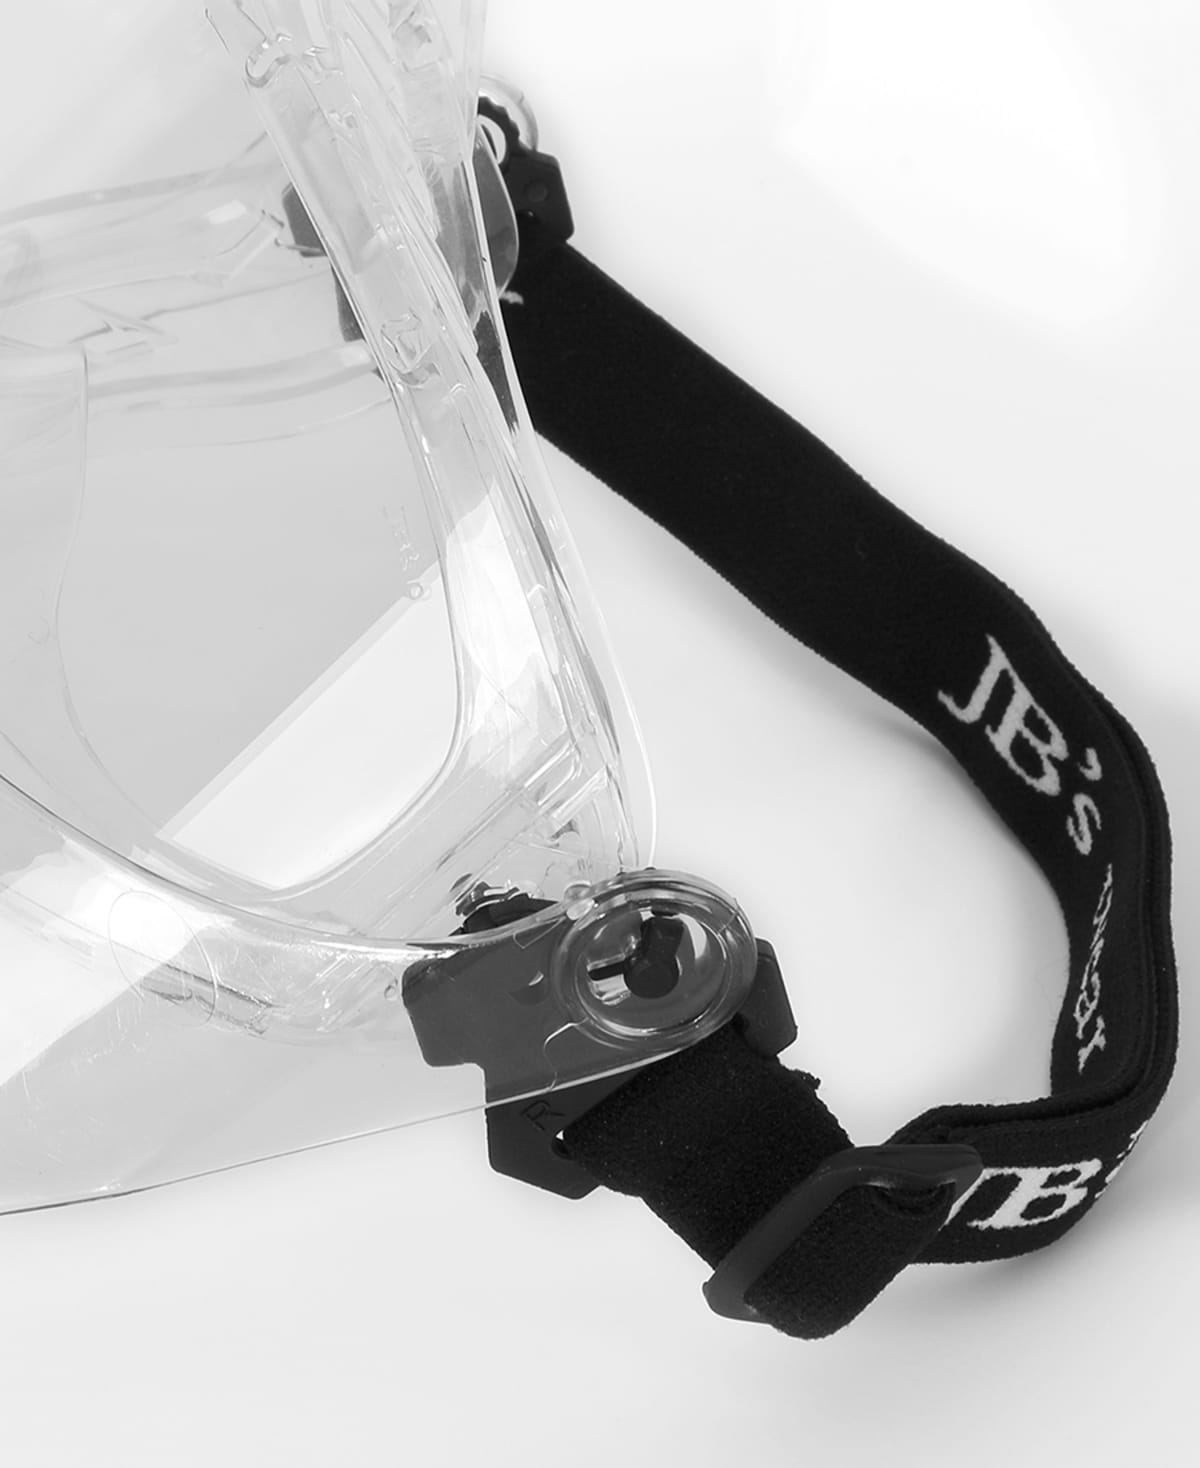 JB's Goggle and Mask Combination